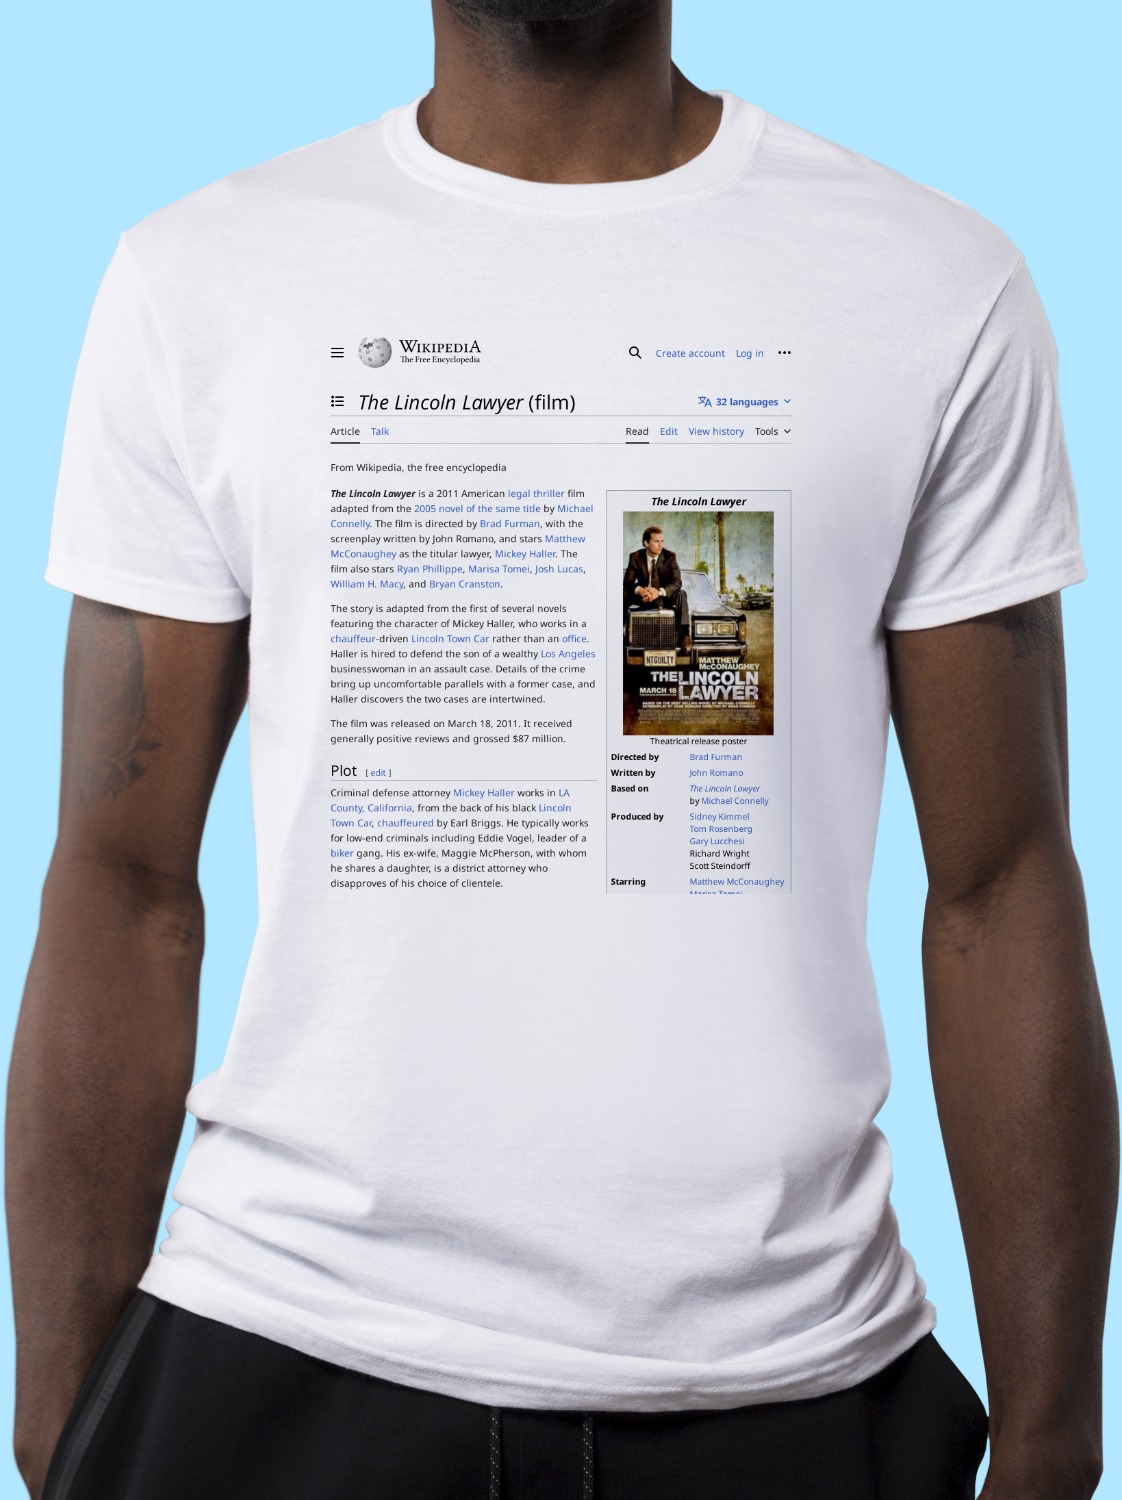 The_Lincoln_Lawyer_(film) Wikipedia Shirt